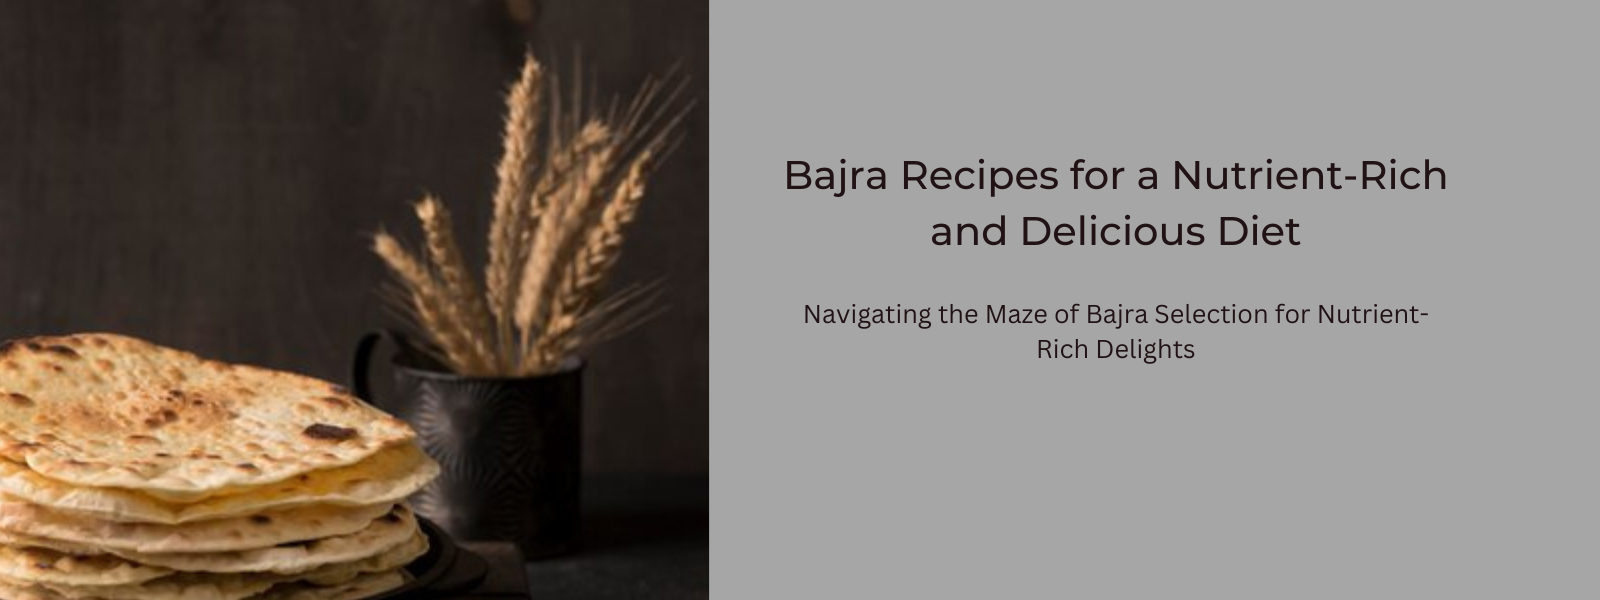 Bajra Recipes for a Nutrient-Rich and Delicious Diet